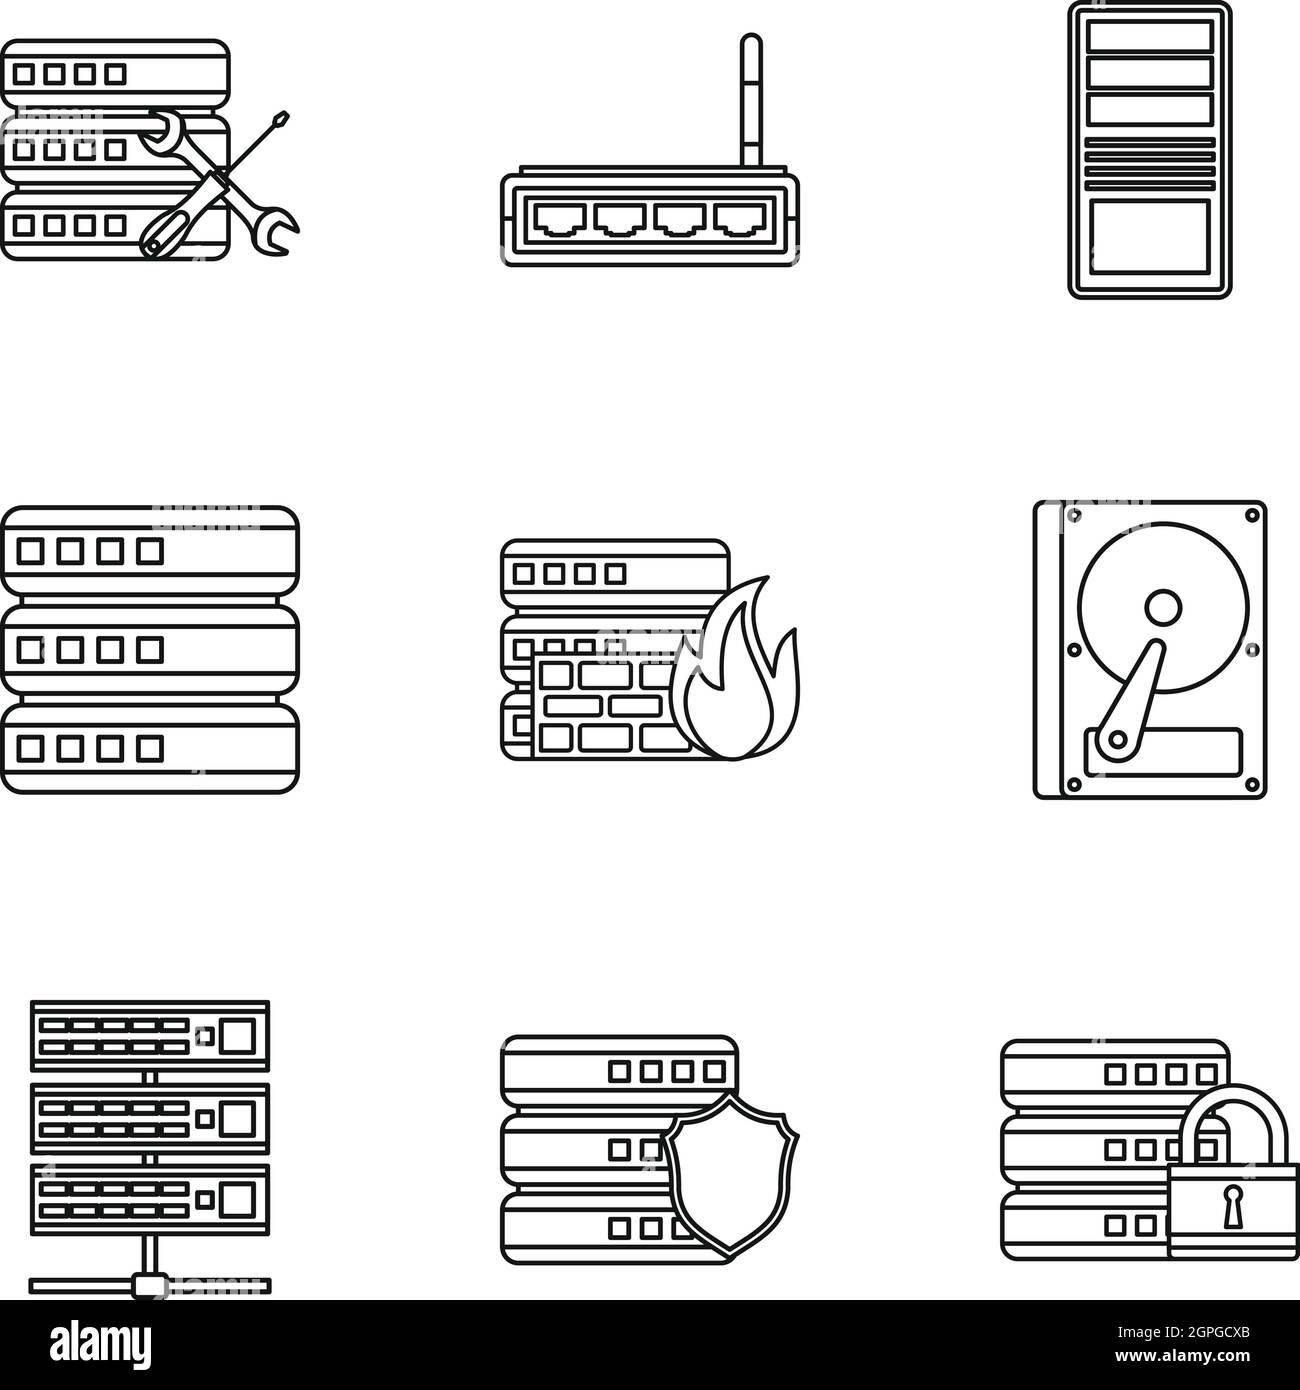 Computer setup icons set, outline style Stock Vector